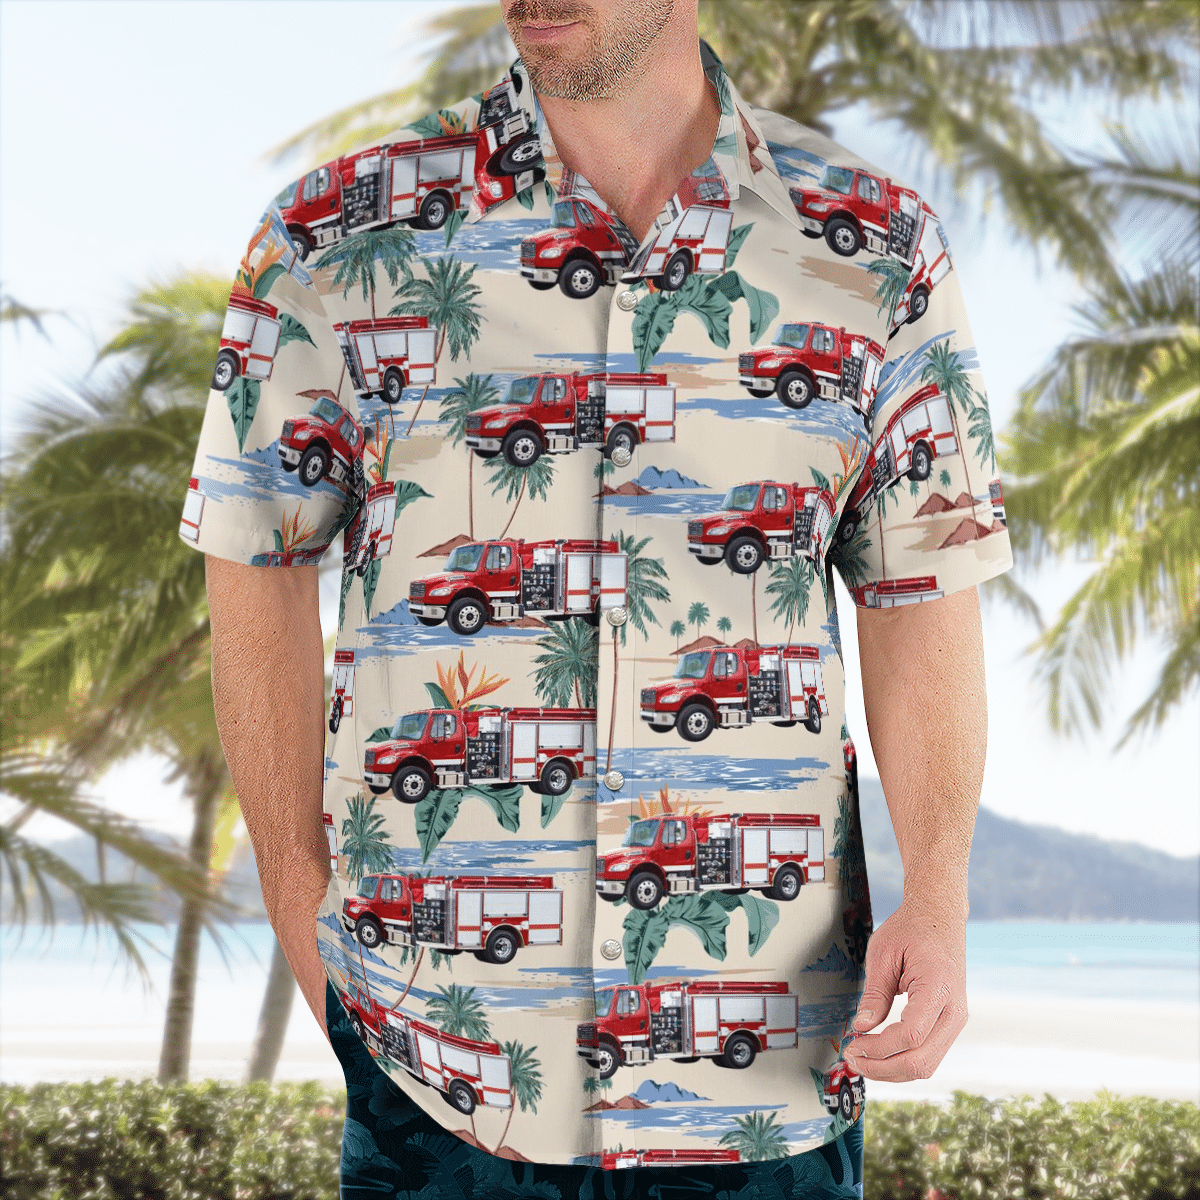 There are several styles of beach and Hawaiian shorts and tops to choose from 30